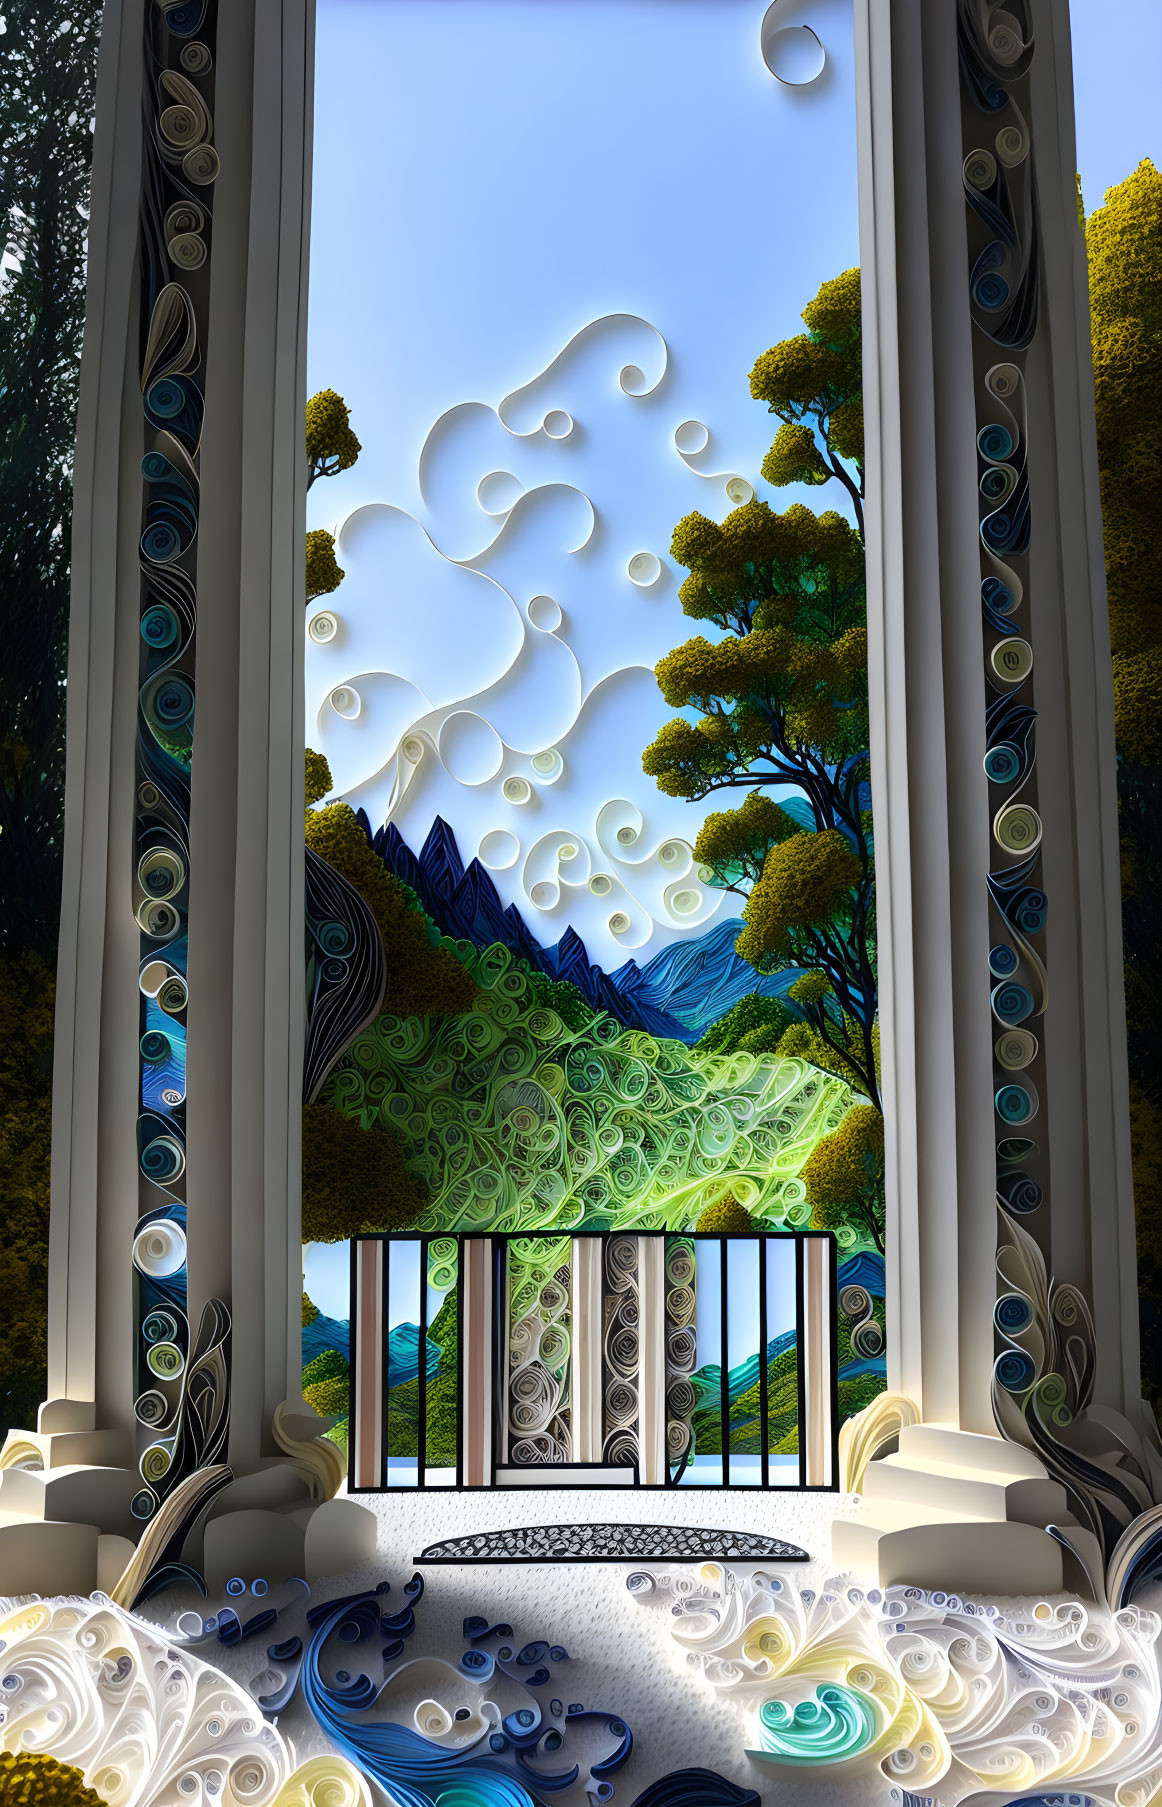 Surreal landscape with ornate archway, whimsical clouds, stylized trees